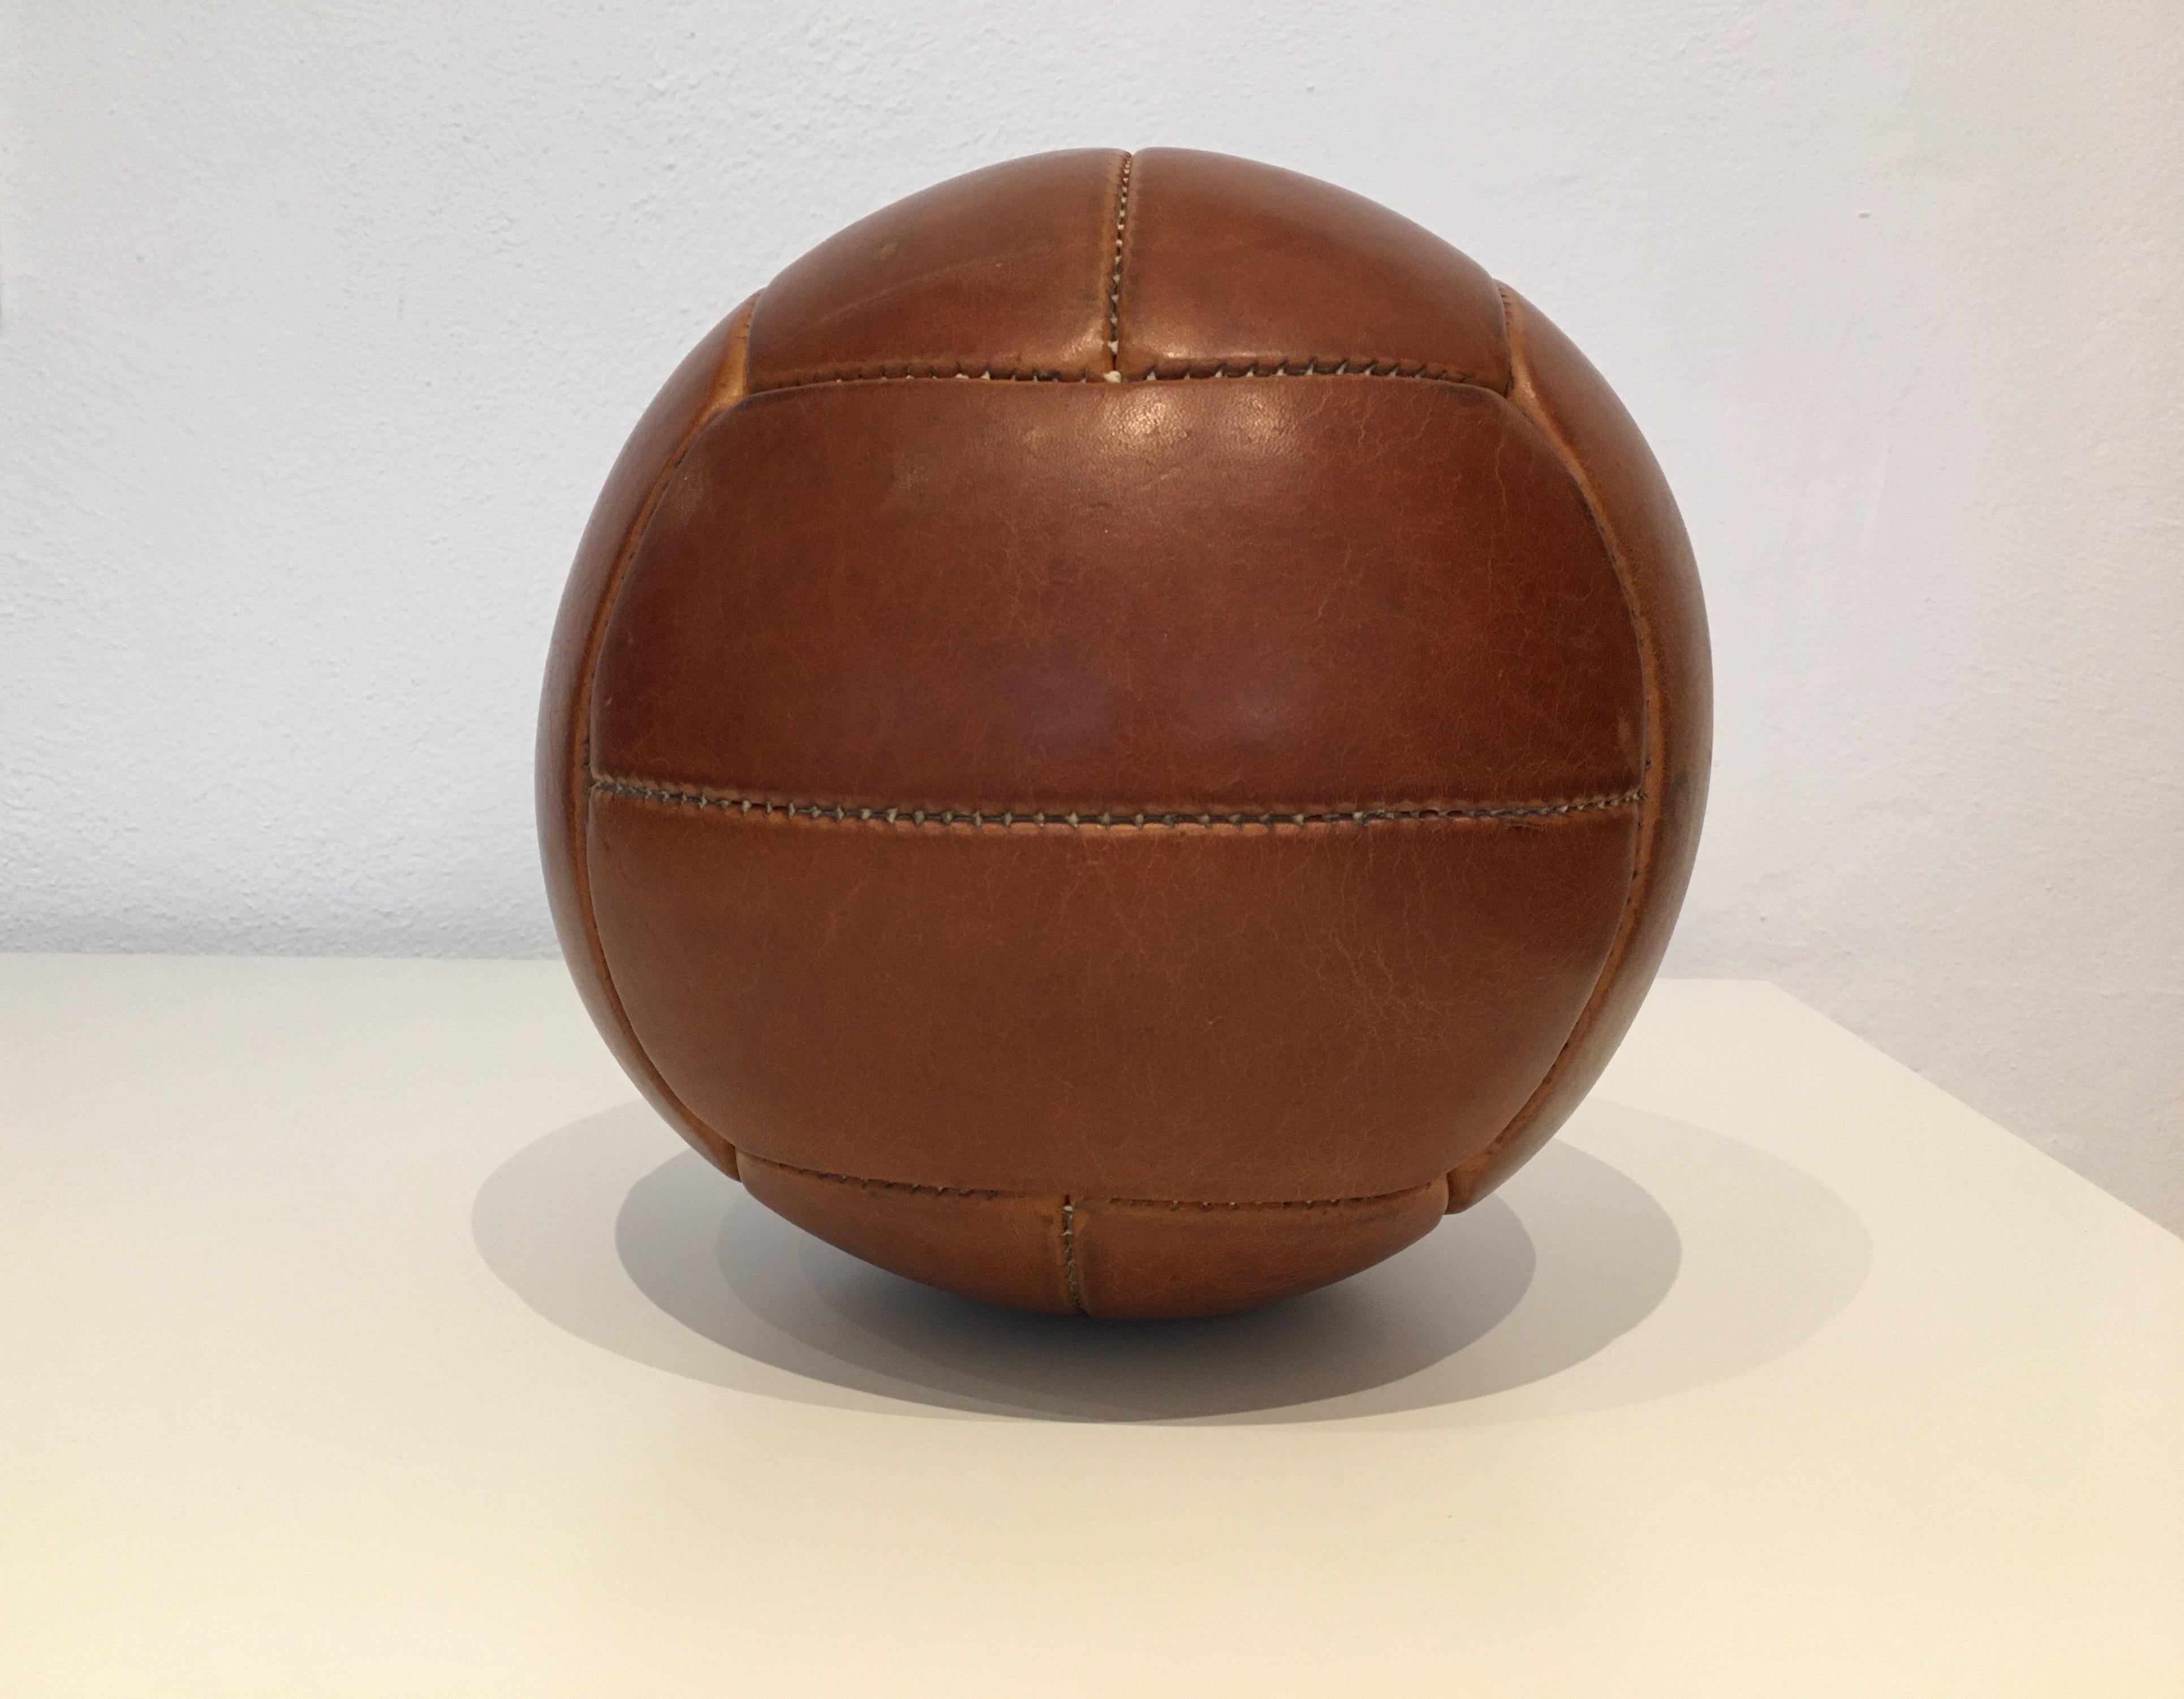 This medicine ball comes from the stock of an old Czech gymnasium. Made in the 1930s. Patina consistent with age and use. Cleaned and treated with a special leather care. Weight: 2kg. Measures: Diameter 9.4 inch.